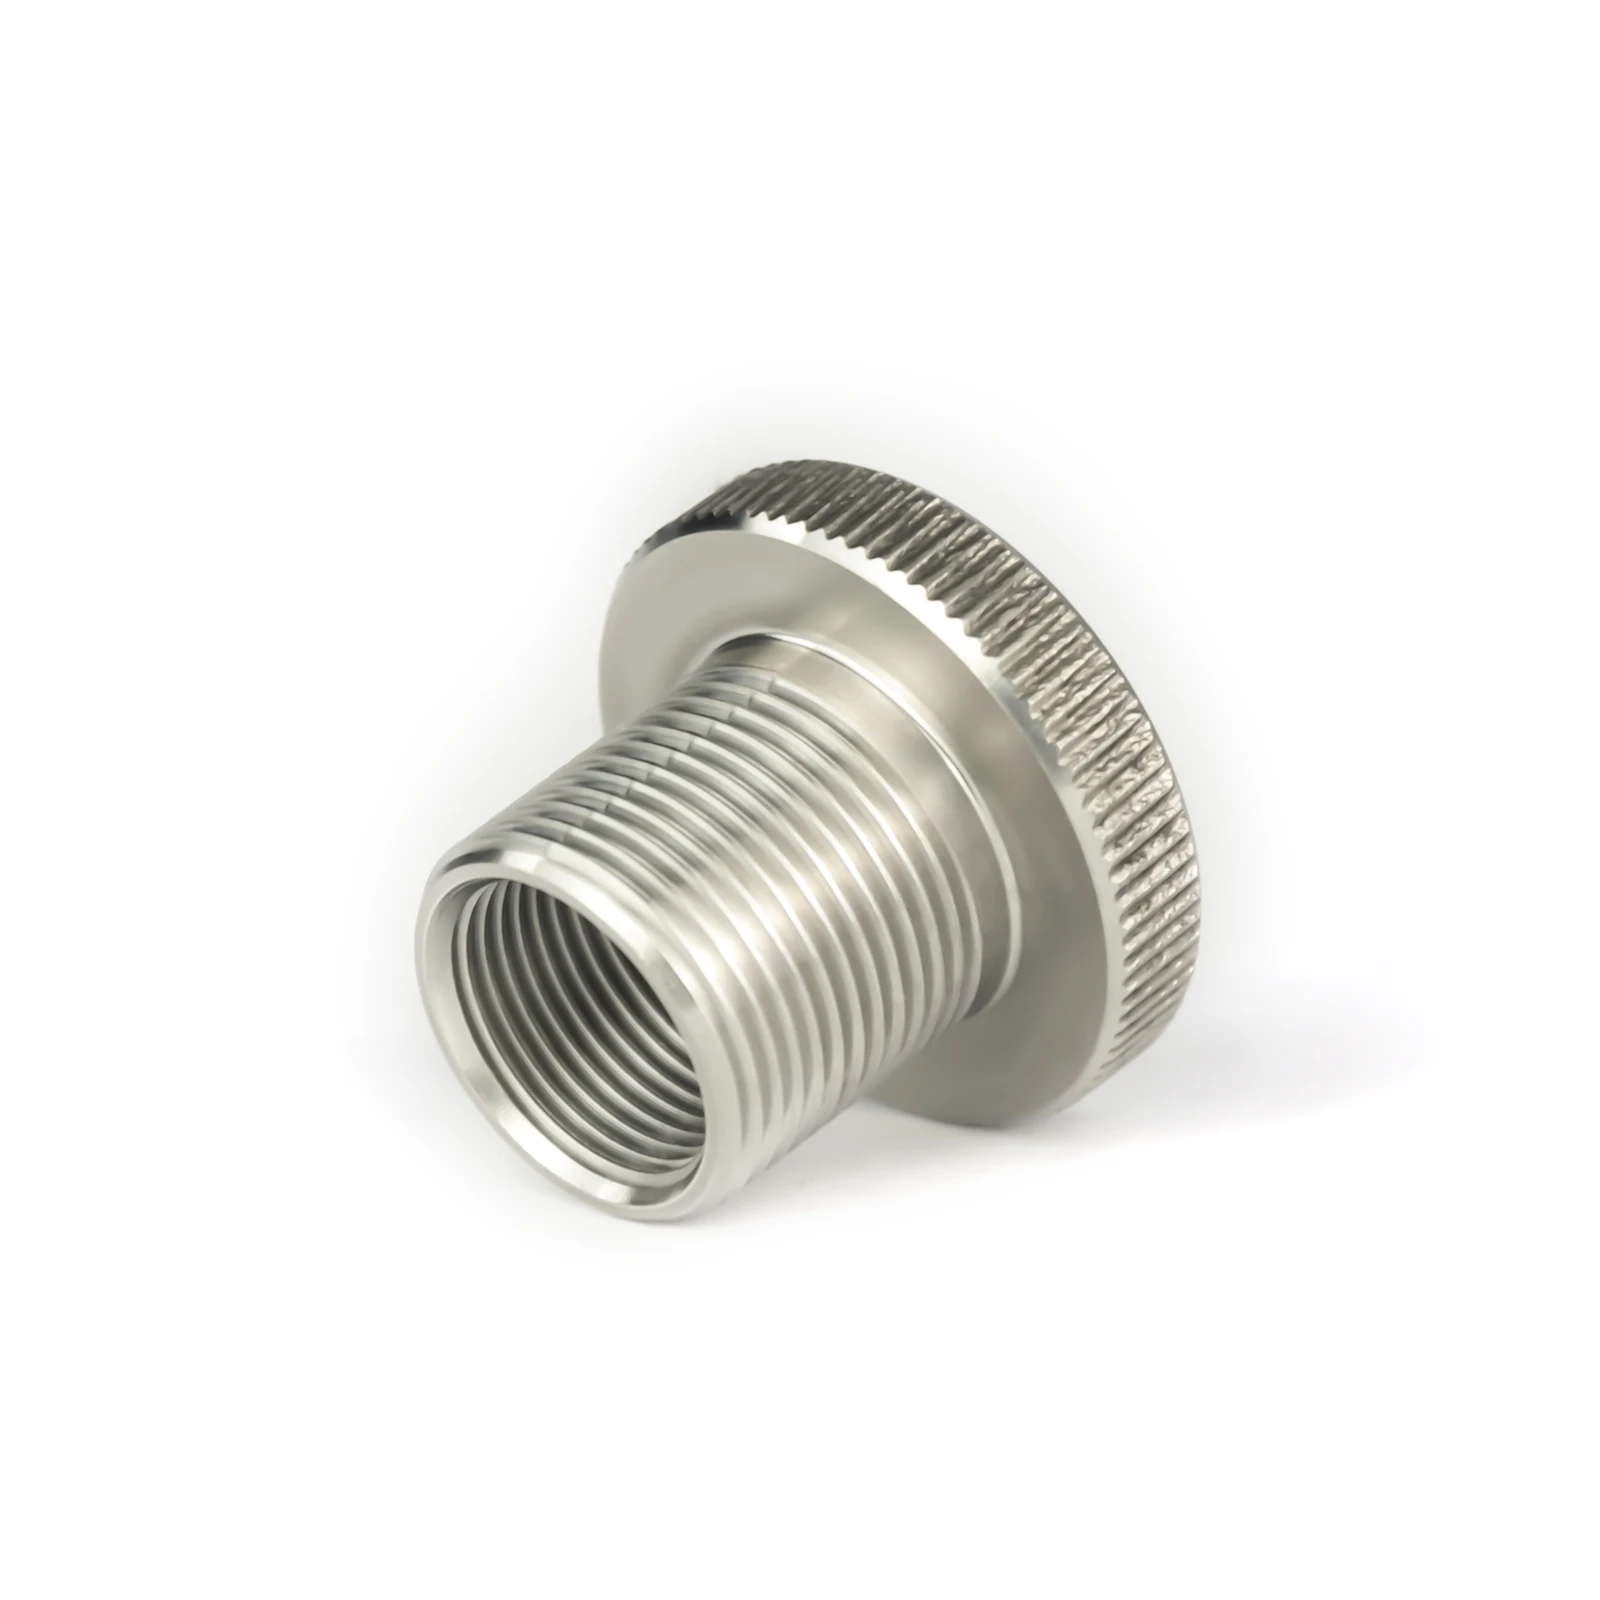 304 Stainless Steel 1 2 28 ID Female to 5 8 24 OD Male Threaded Adapter